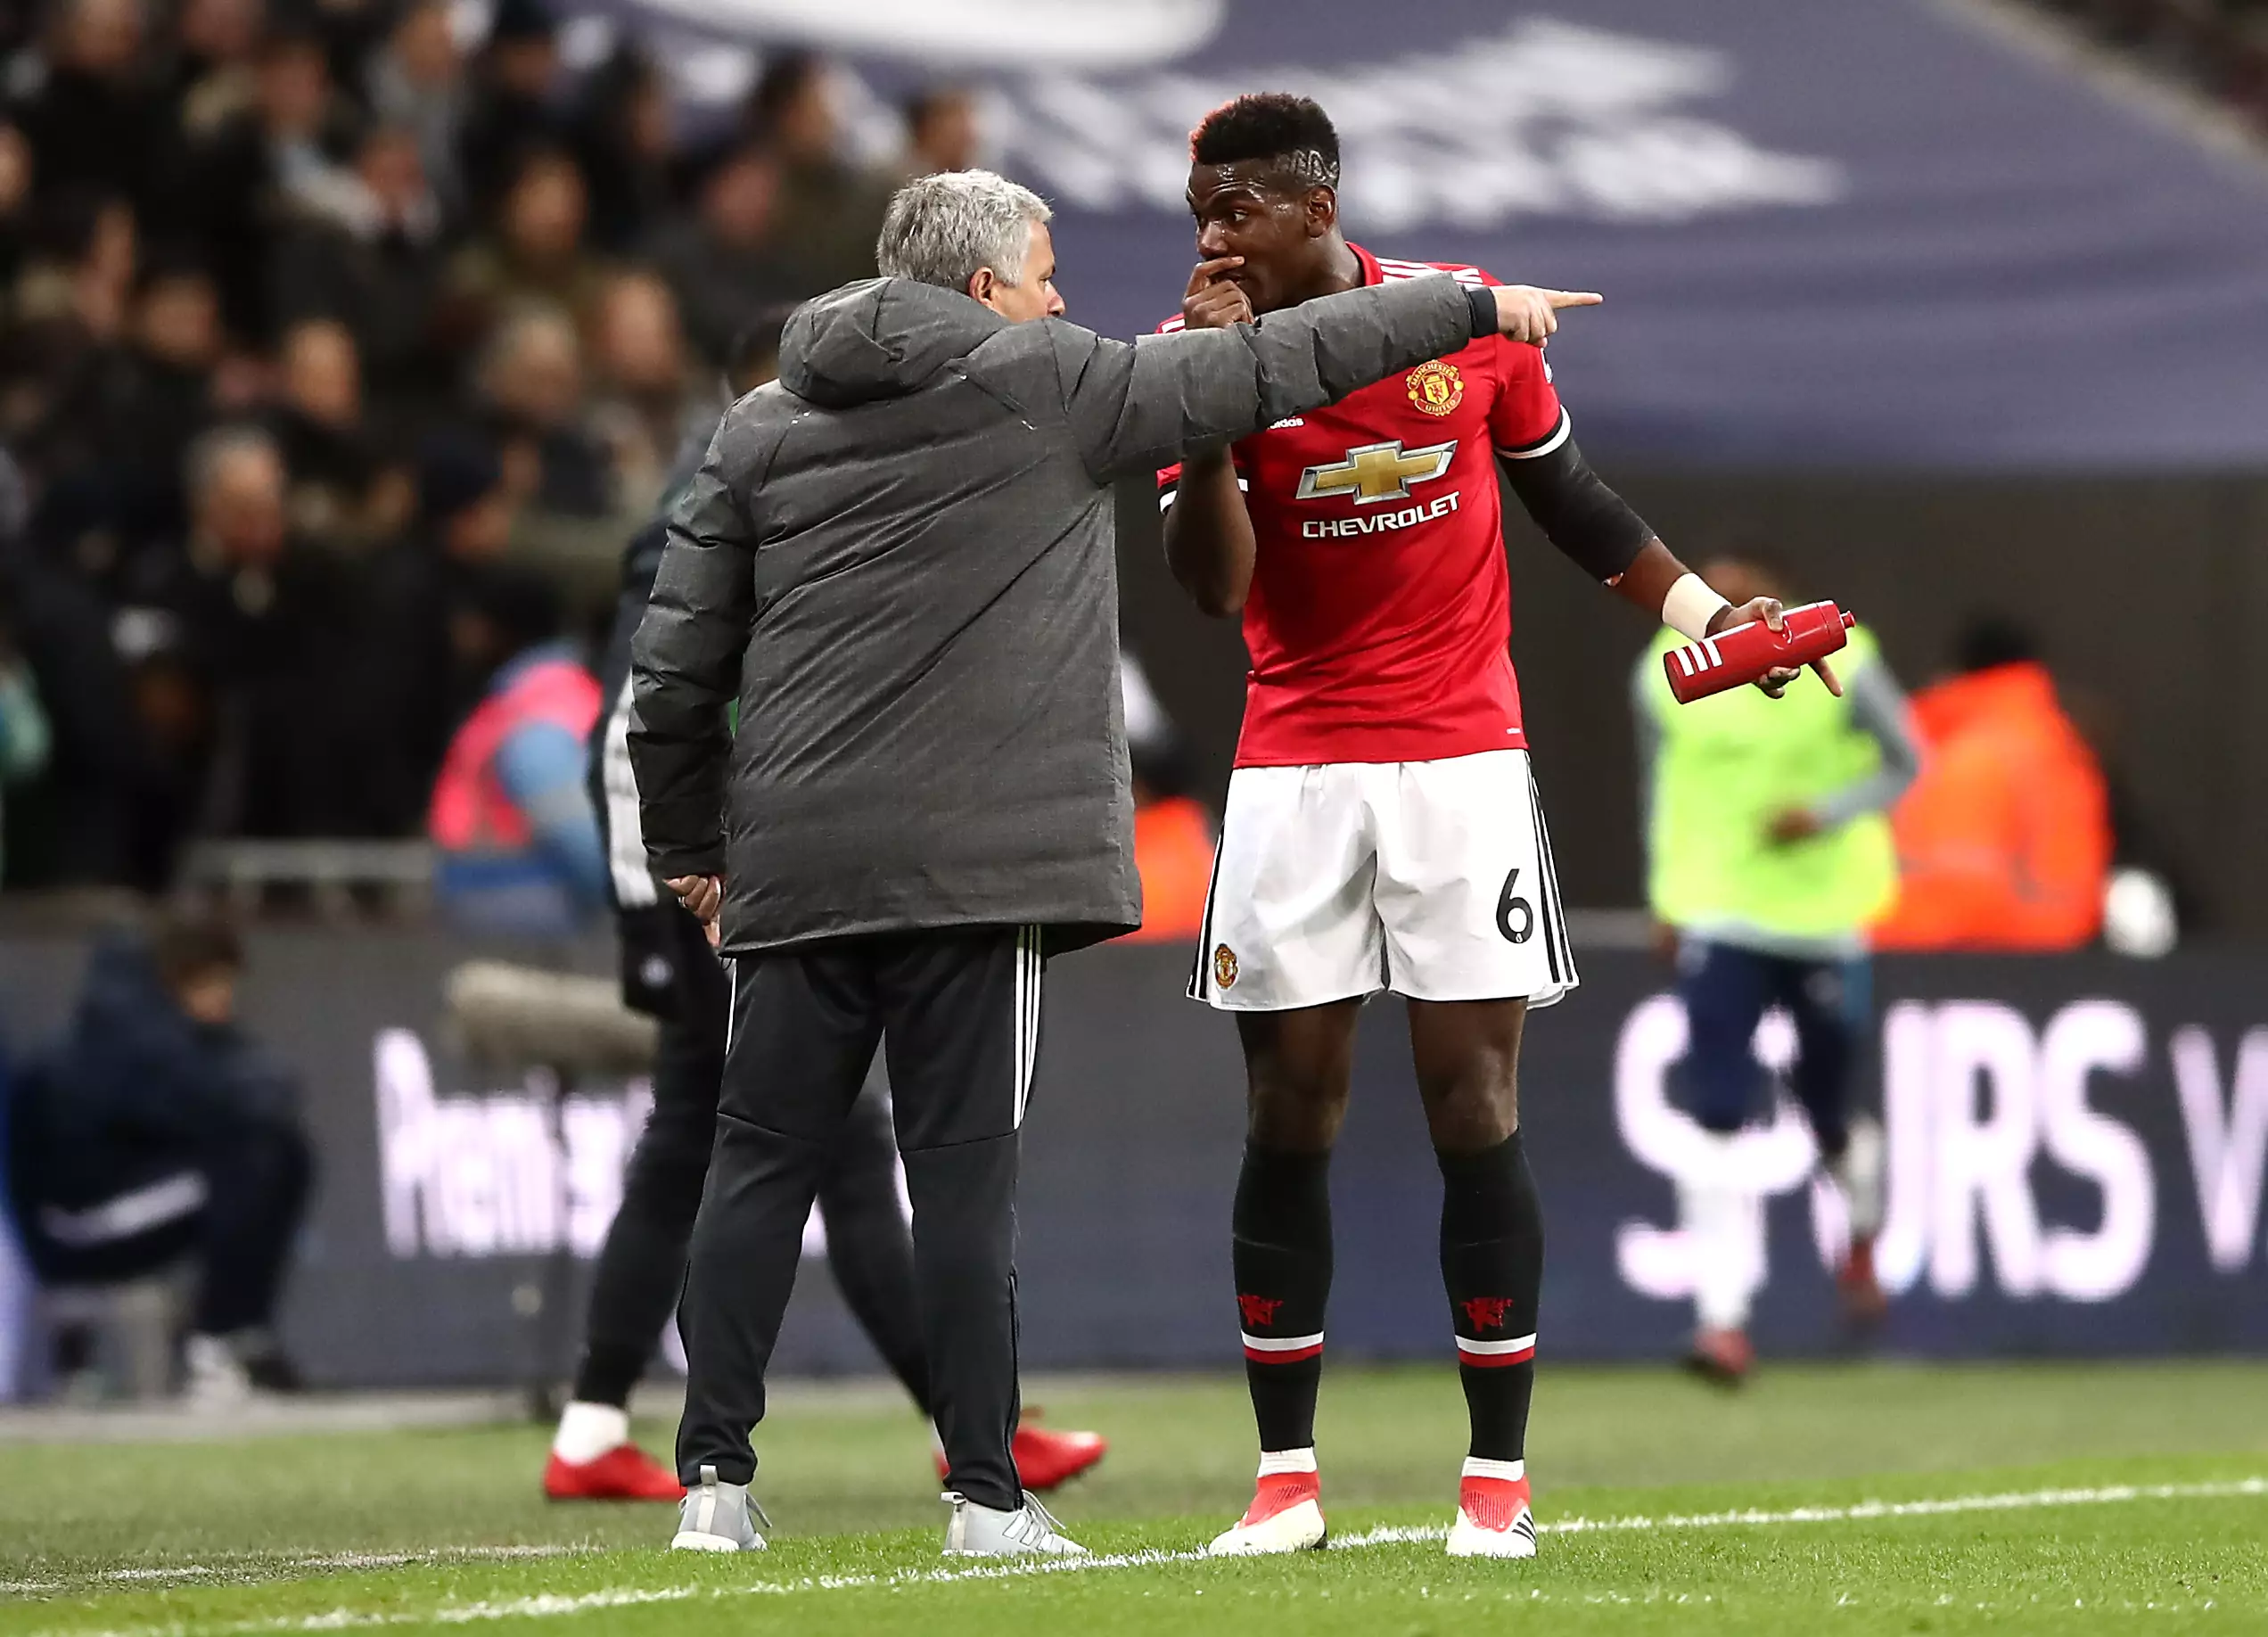 Pogba exchanges words with Mourinho. Image: PA